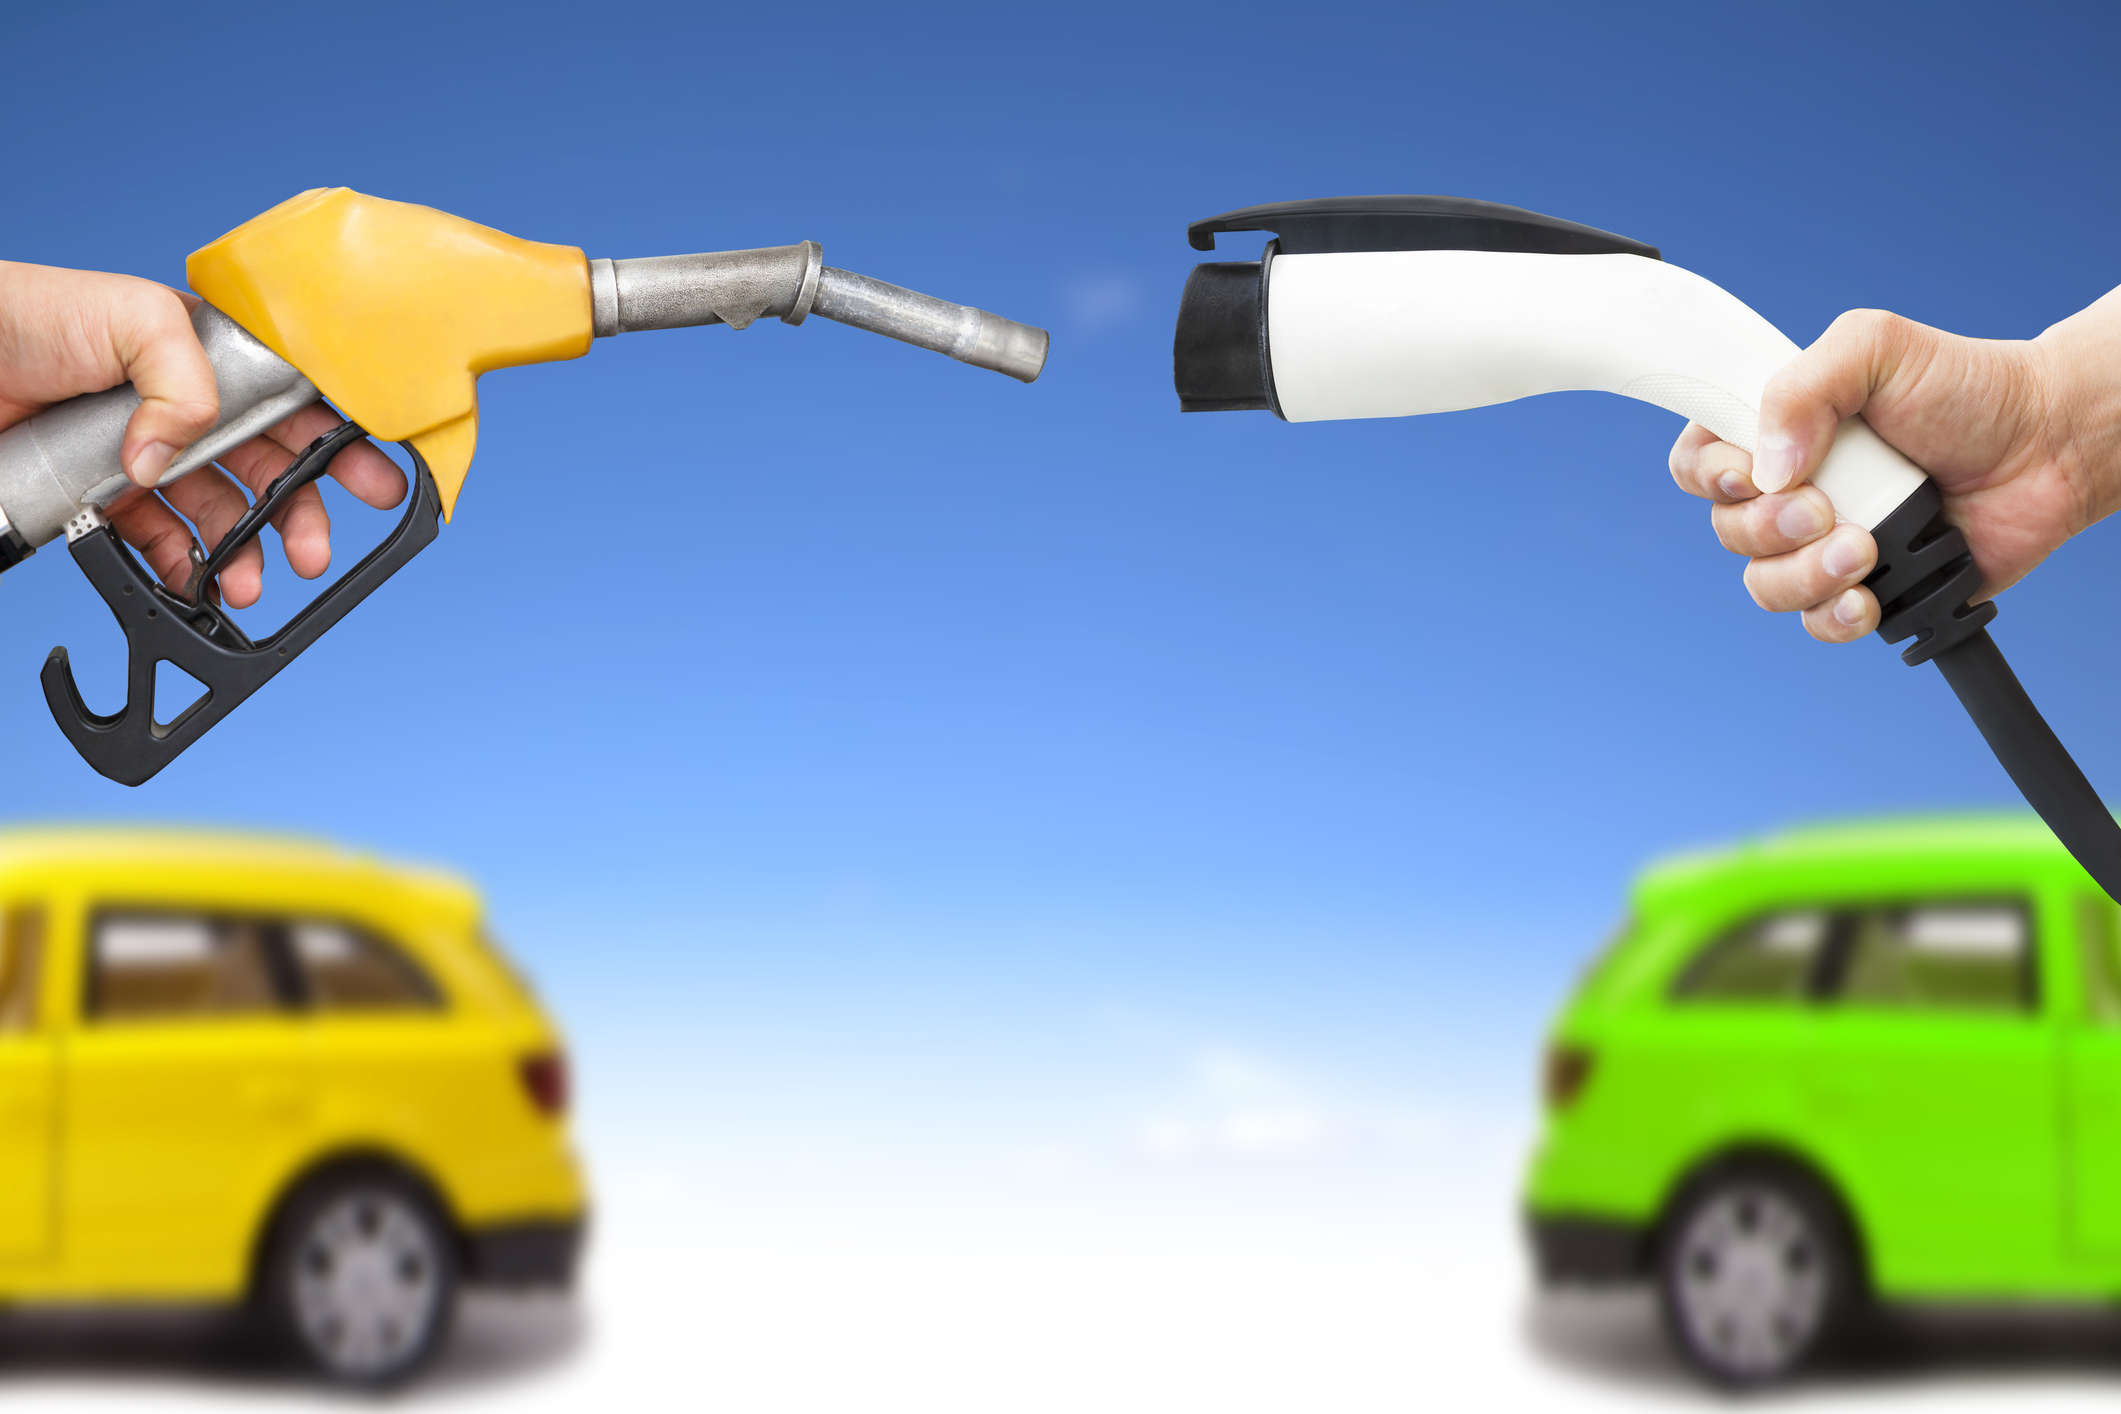 Analysis: When do electric vehicles become cleaner than gasoline cars?